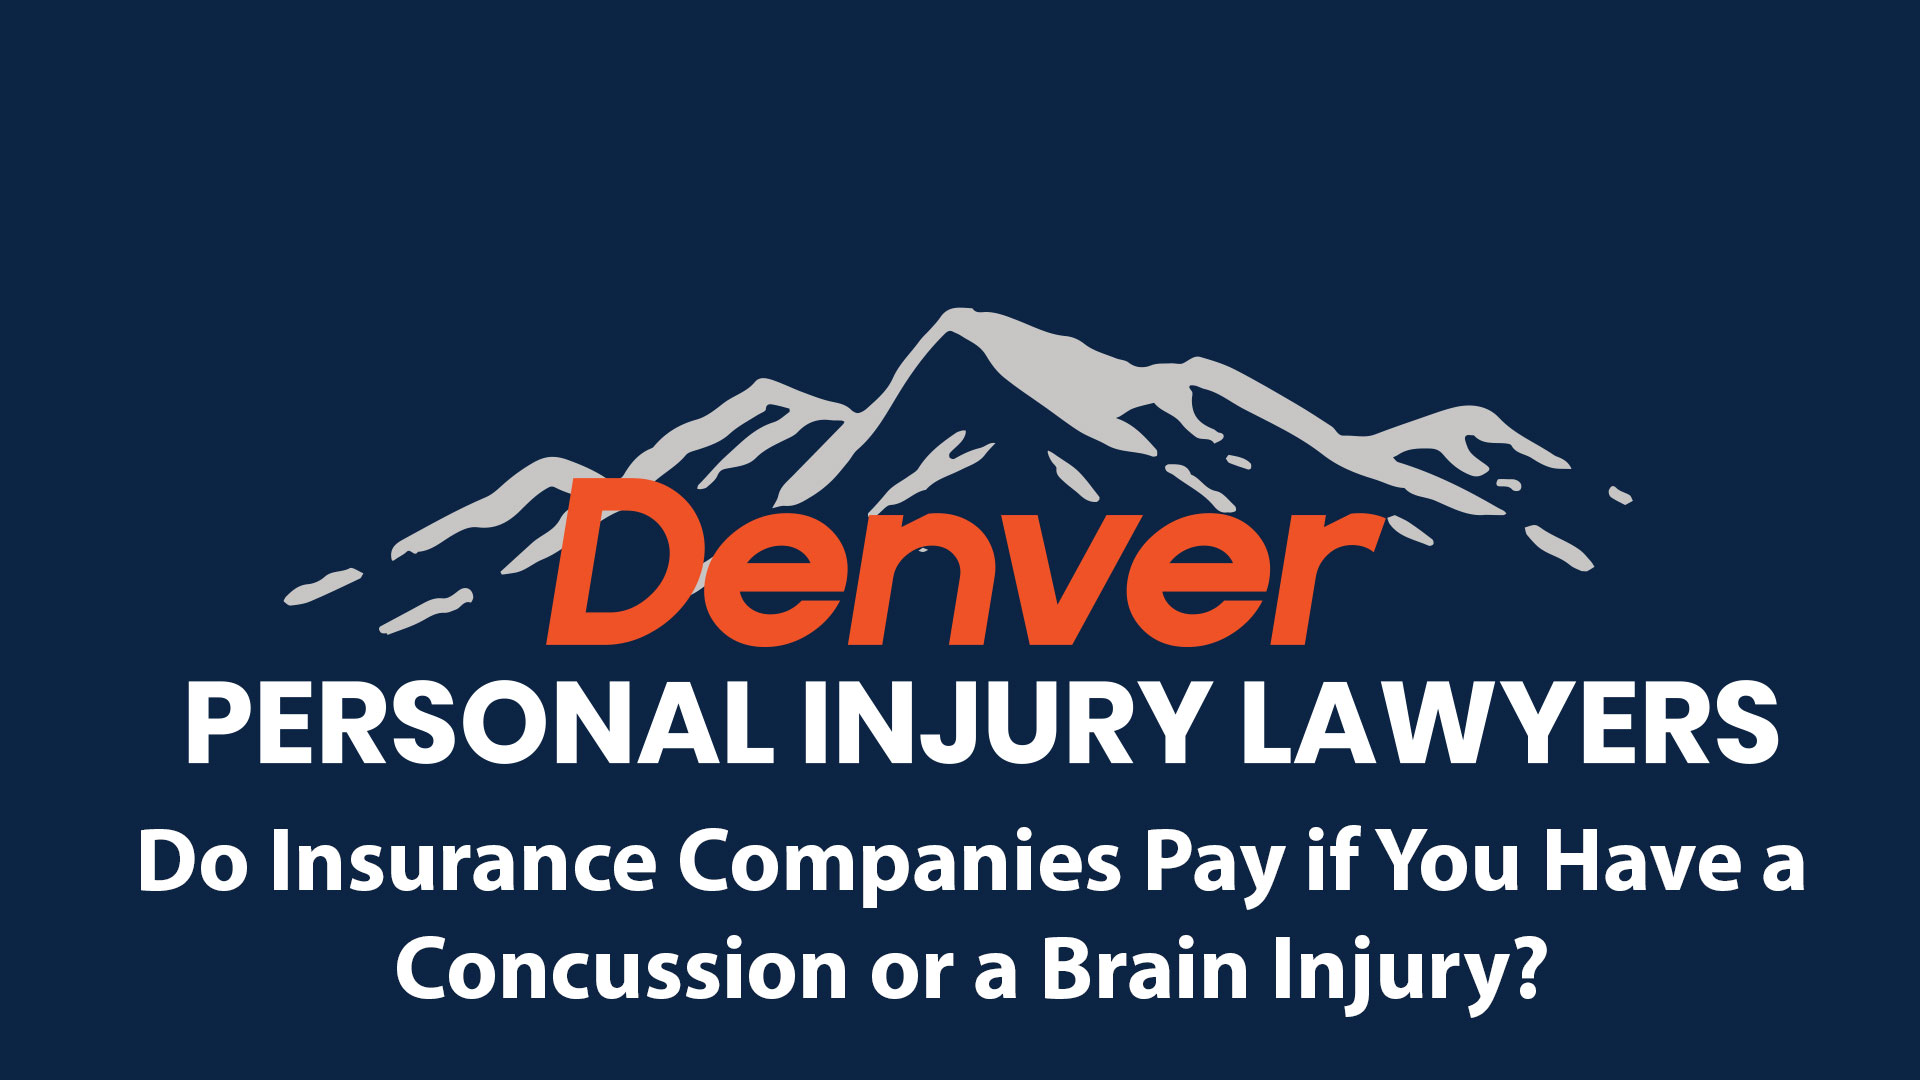 Do Insurance Companies Pay if You Have a Concussion or a Brain Injury?